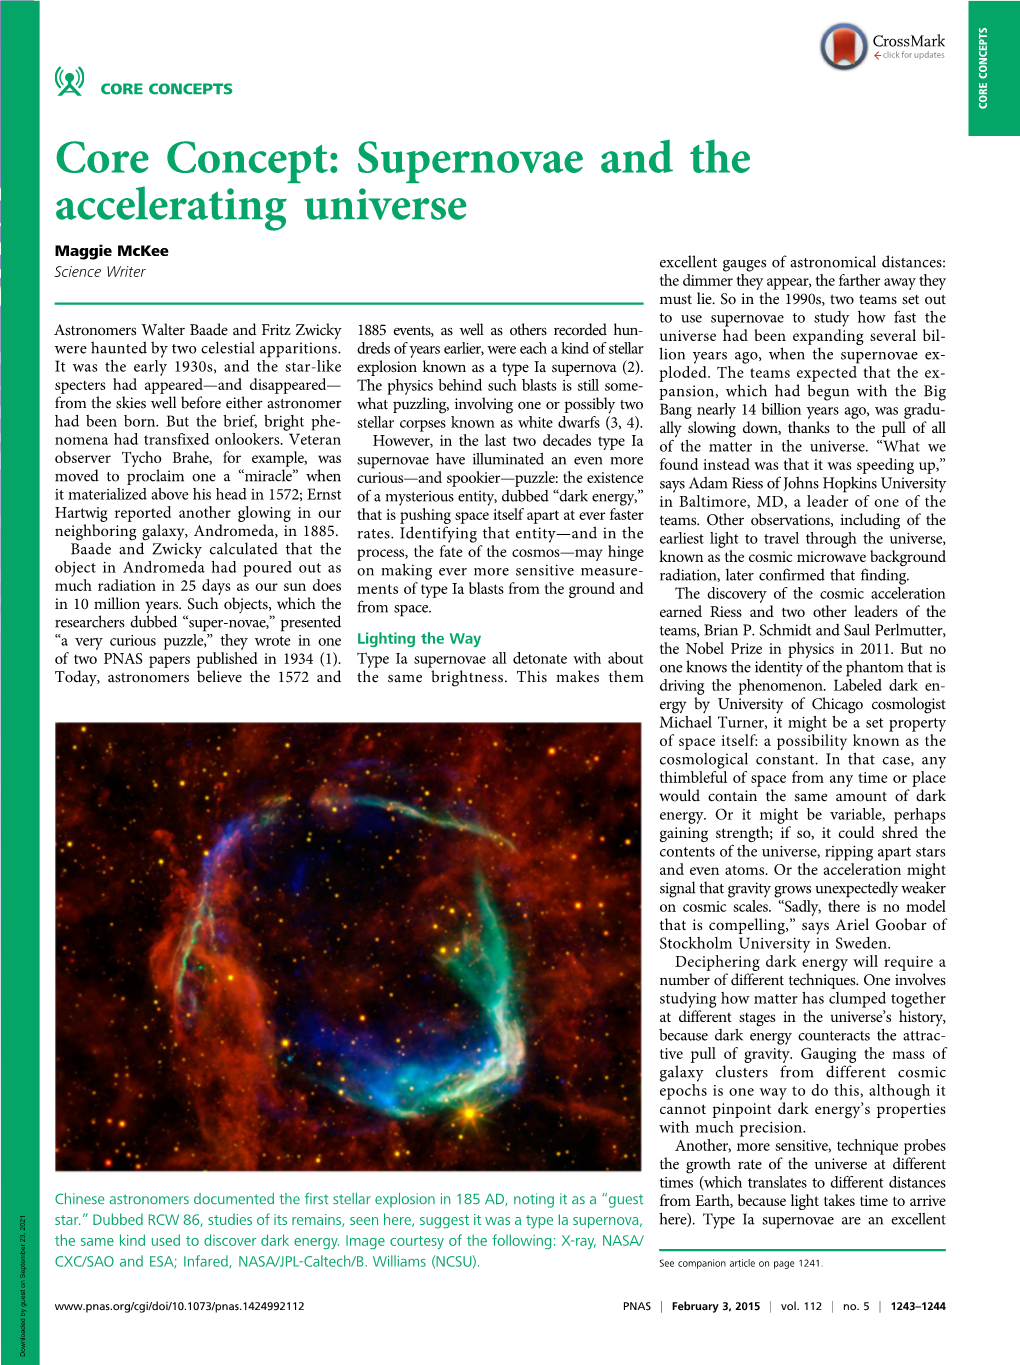 Core Concept: Supernovae and the Accelerating Universe